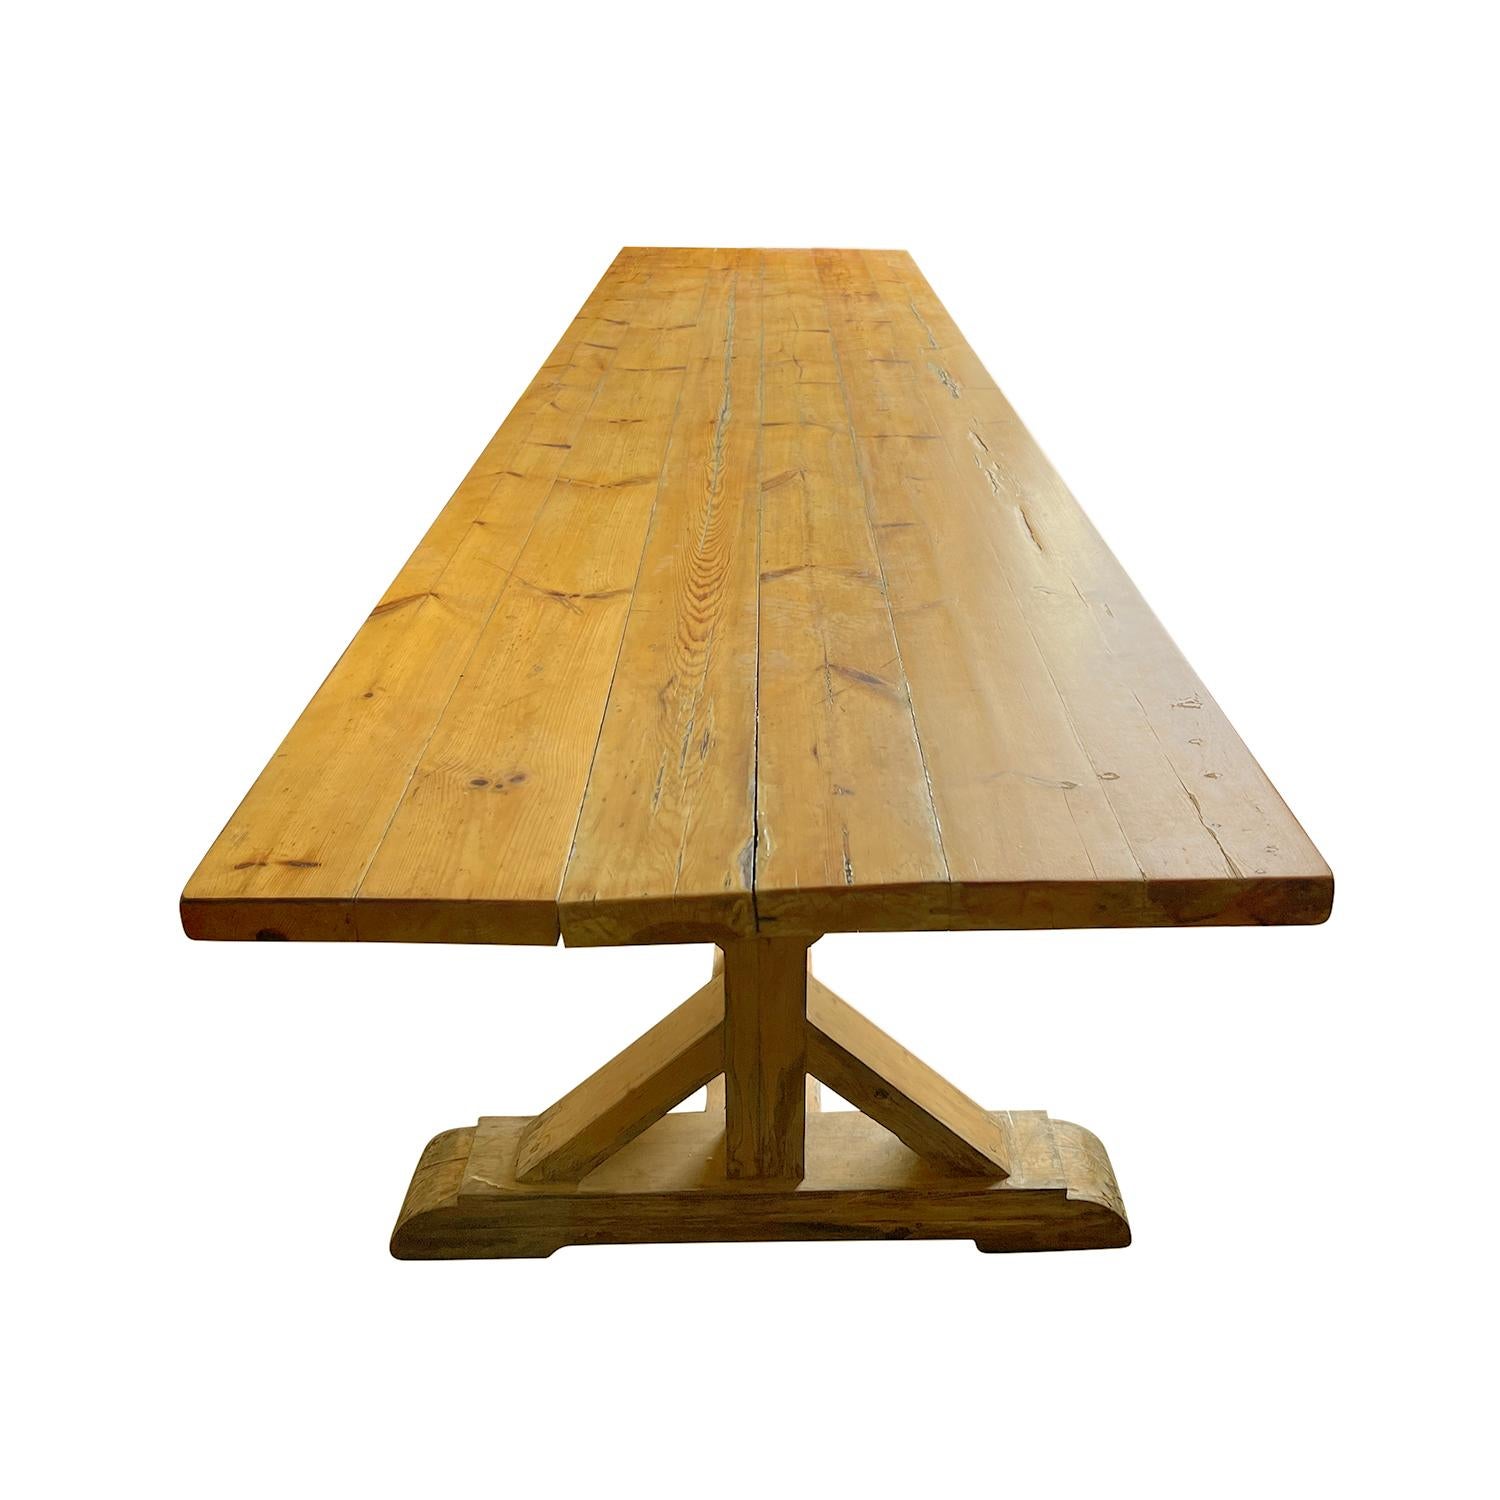 An important and substantial French Provincial Oakwood trestle table with base construction, in good condition. This antique table has very clean and strong lines and proportions. The table top rests upon a framework that is supported by three bell